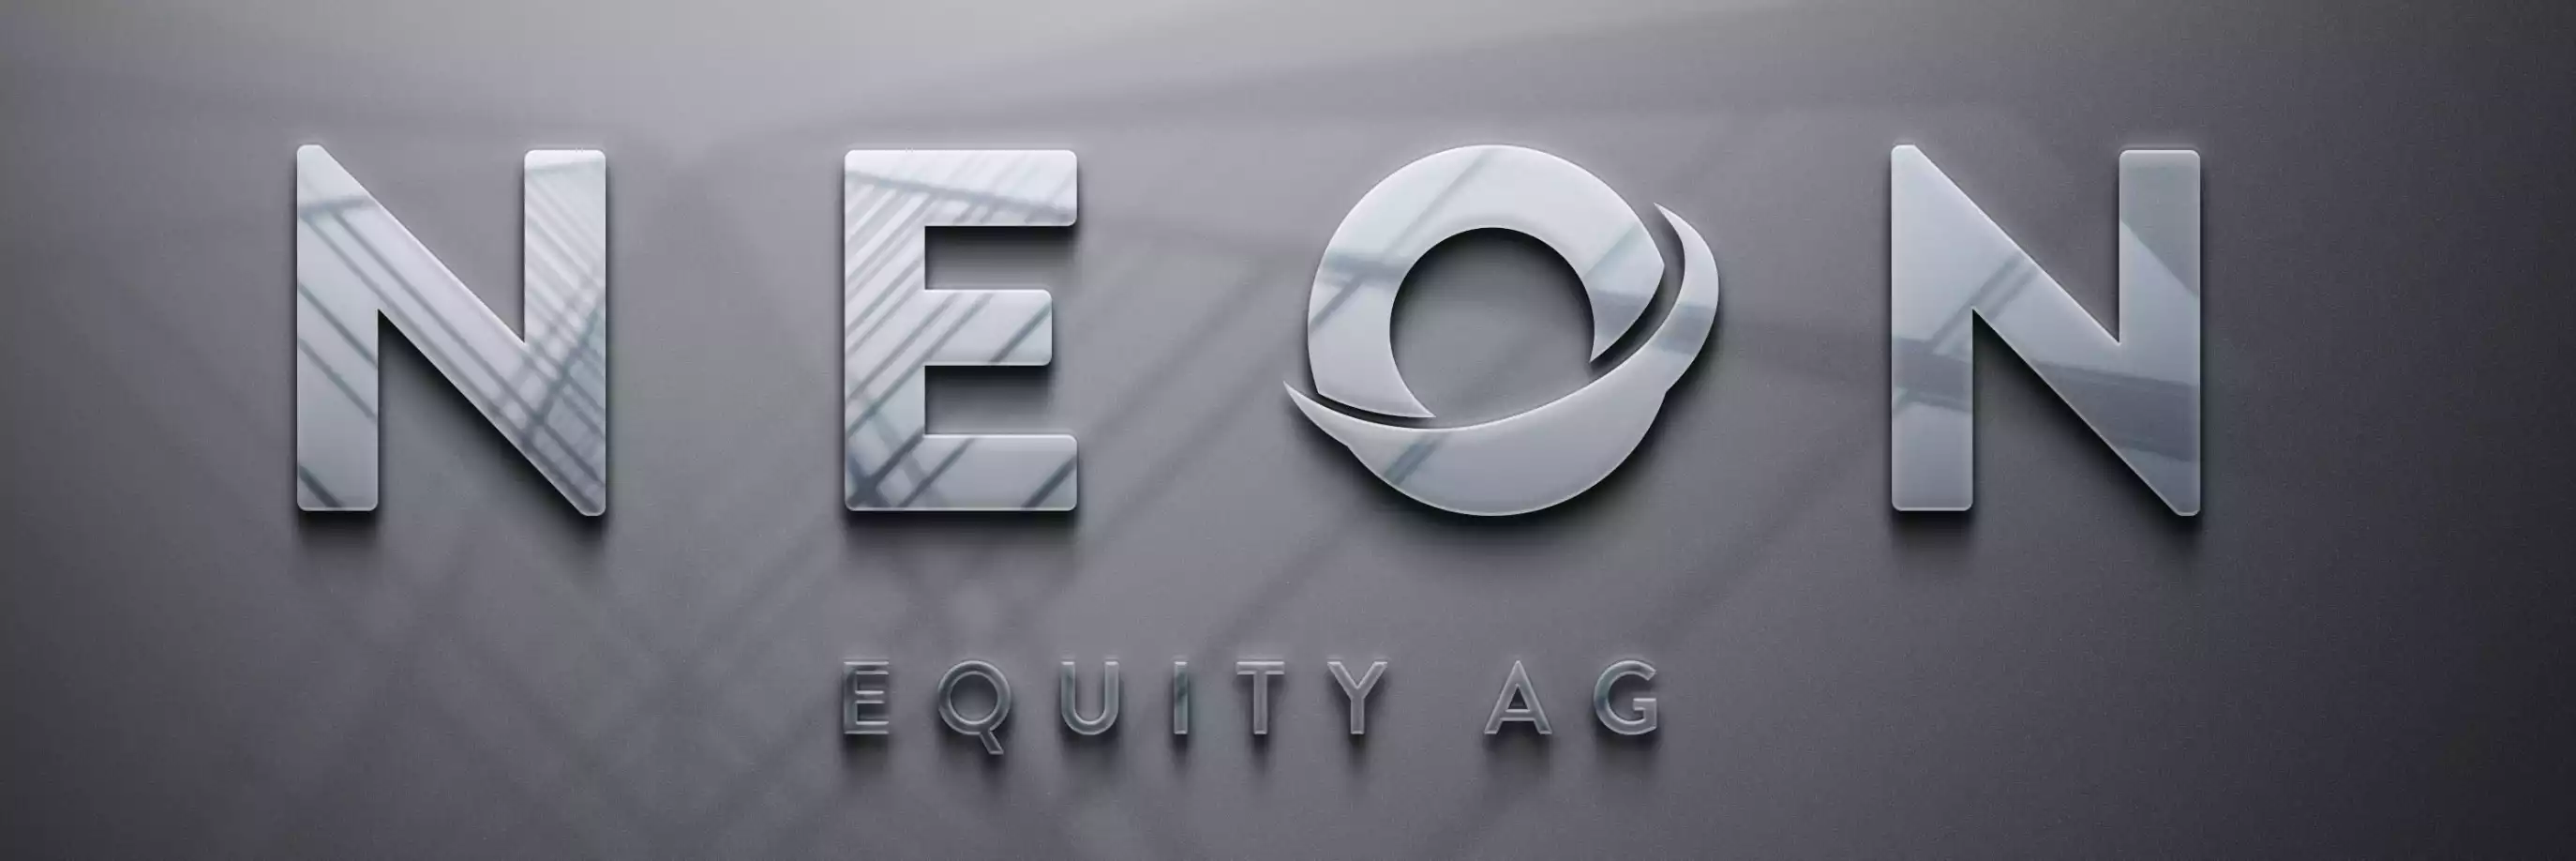 NEON EQUITY AG